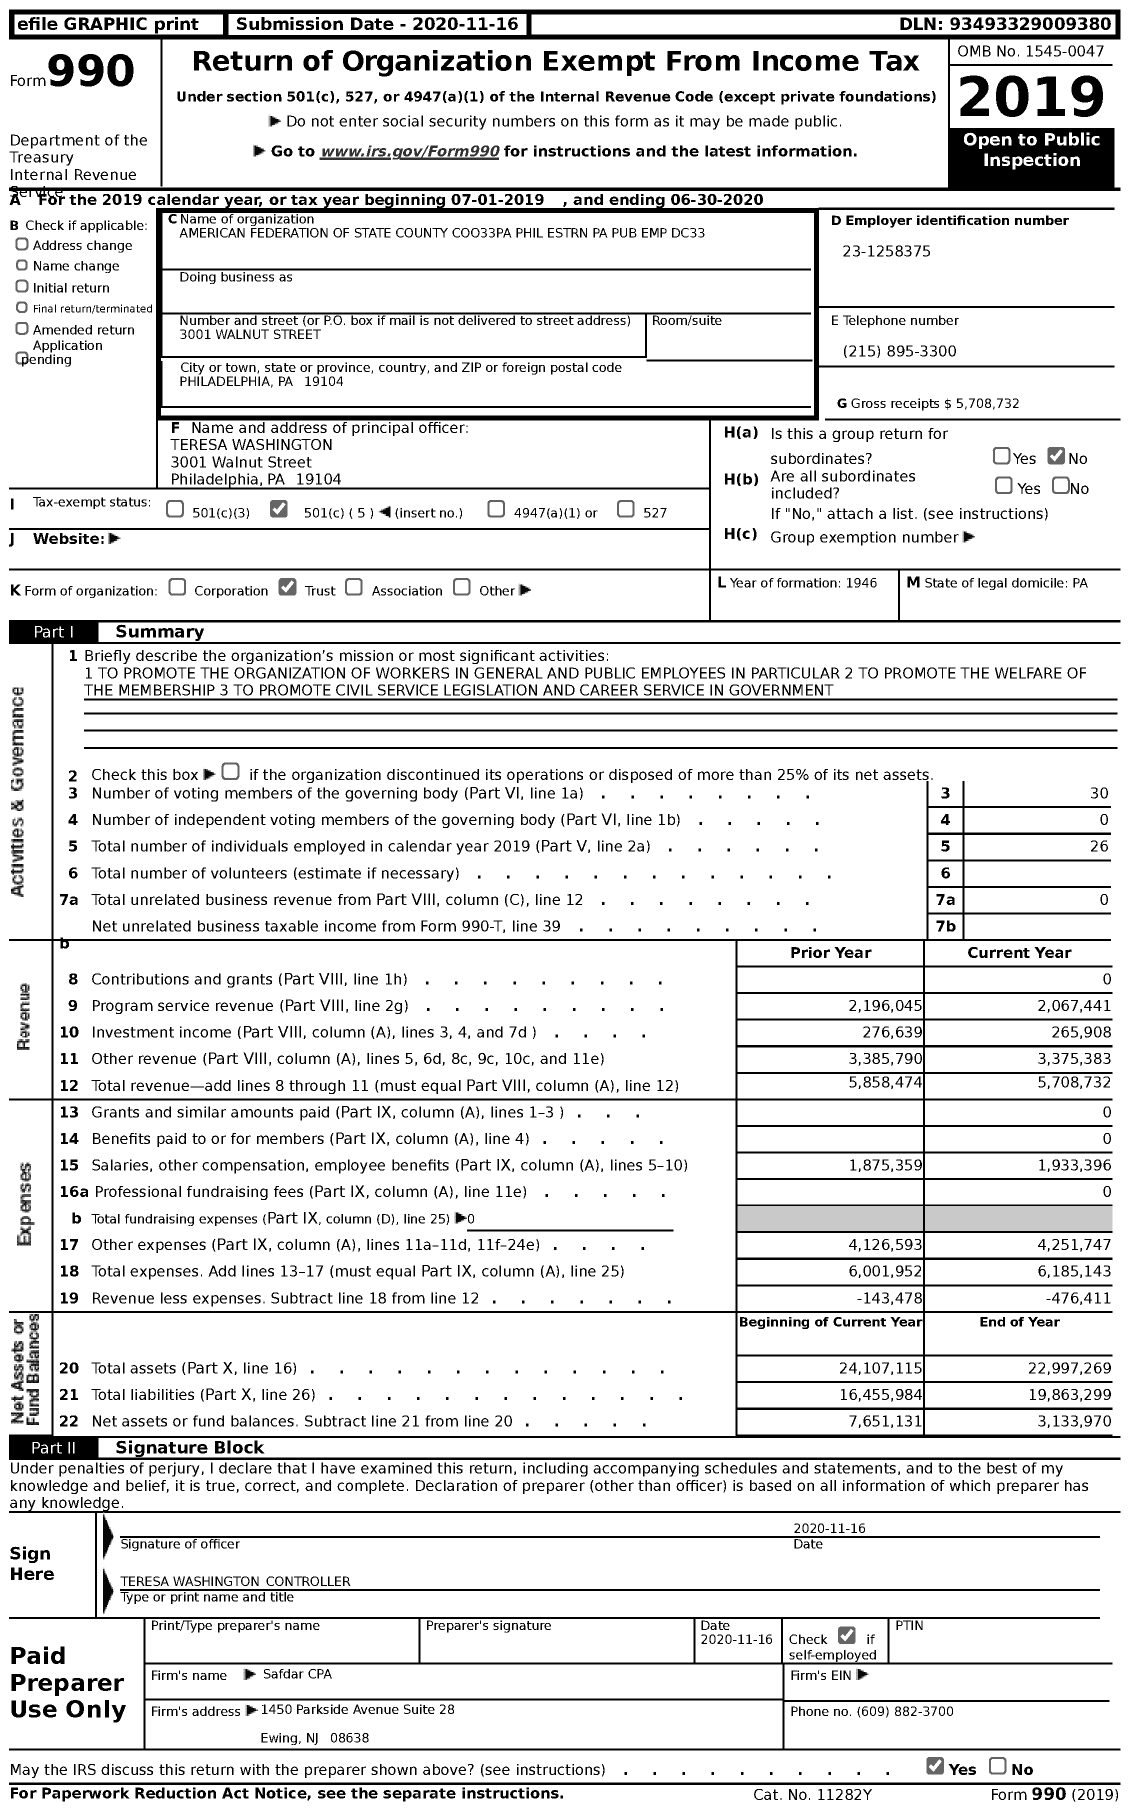 Image of first page of 2019 Form 990 for American Federation of State County & Municipal Employees - C0033pa Phil Estrn Pa Pub Emp DC 33